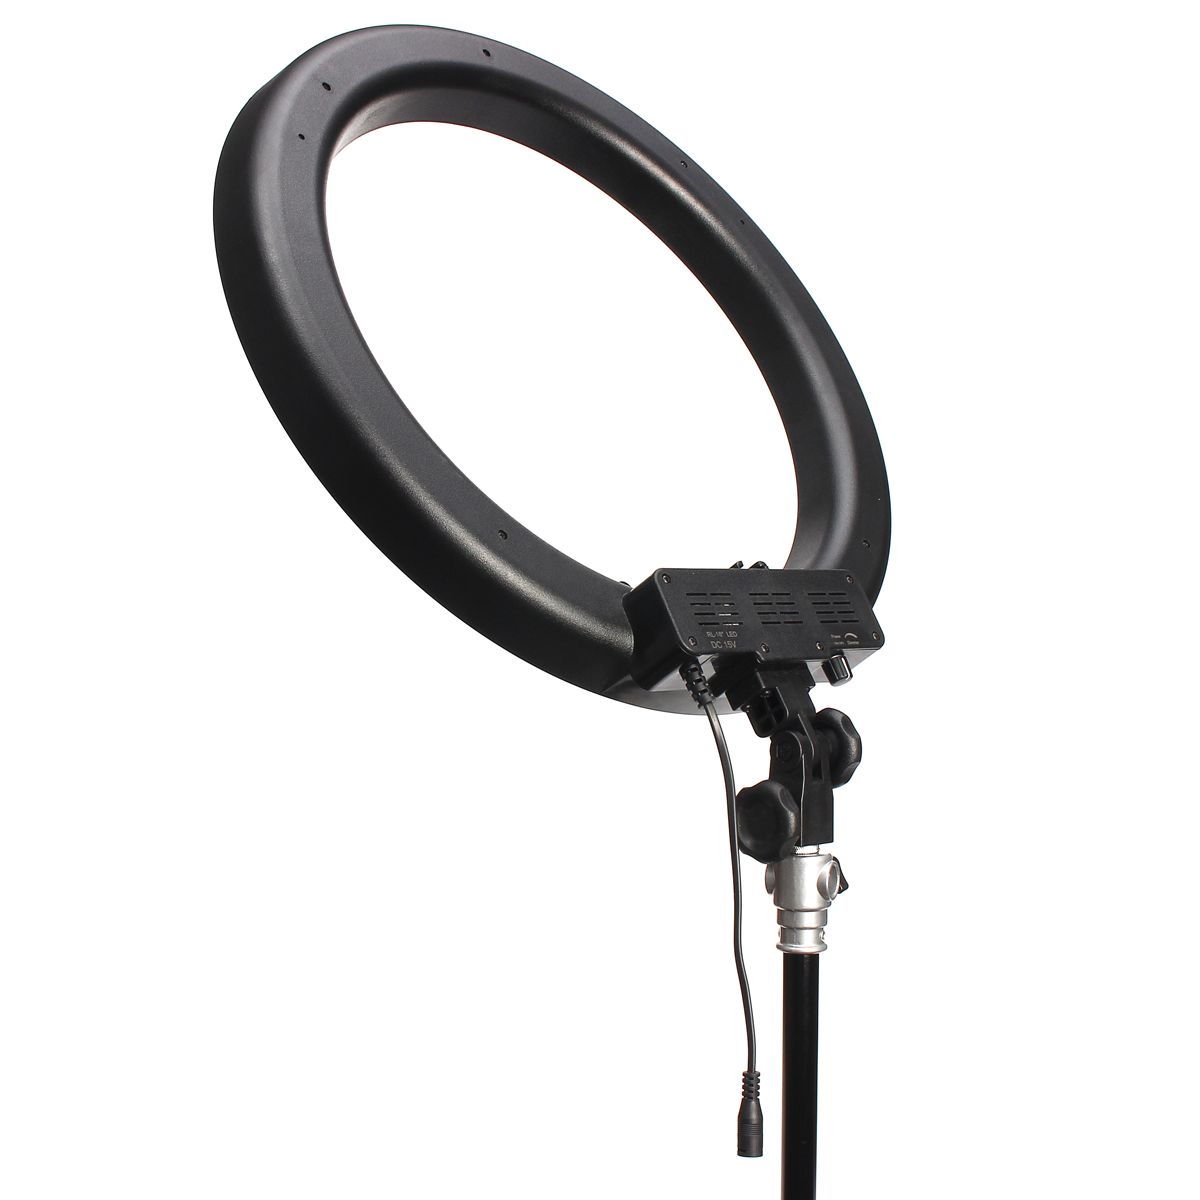 14-Inch-Dimmable-5500K-LED-Ring-Video-Light-With-Diffuser-Light-Stand-Tripod-1639178